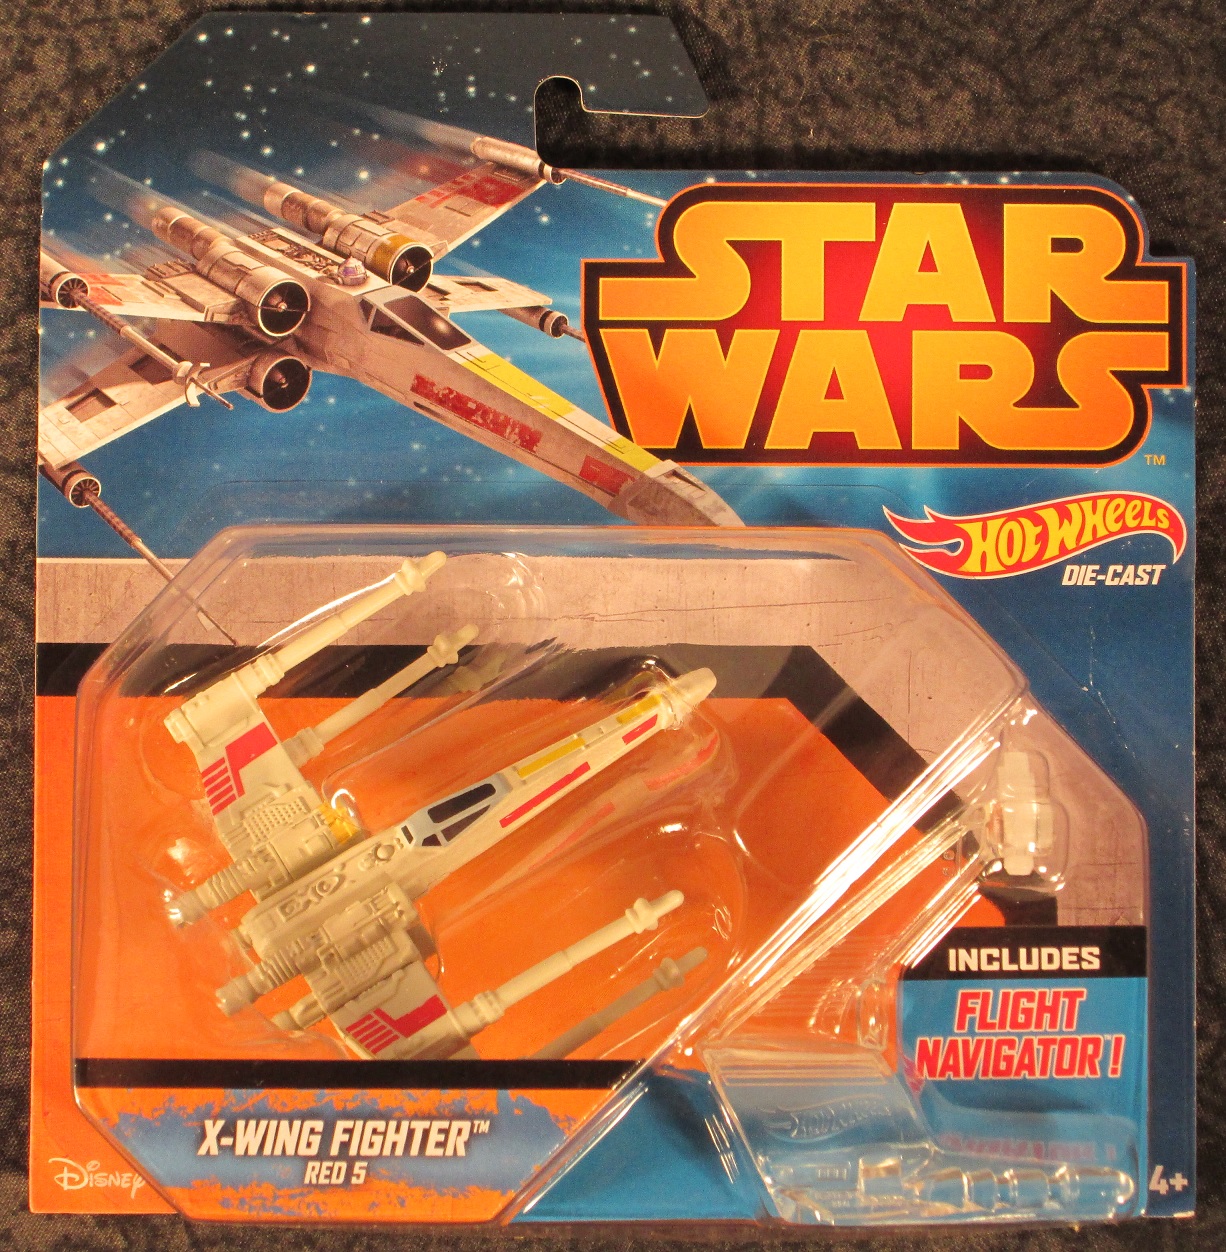 Details about   Hot Wheels Star Wars Lot Carships A-wing Fighter Resistance Last Jedi Disney 